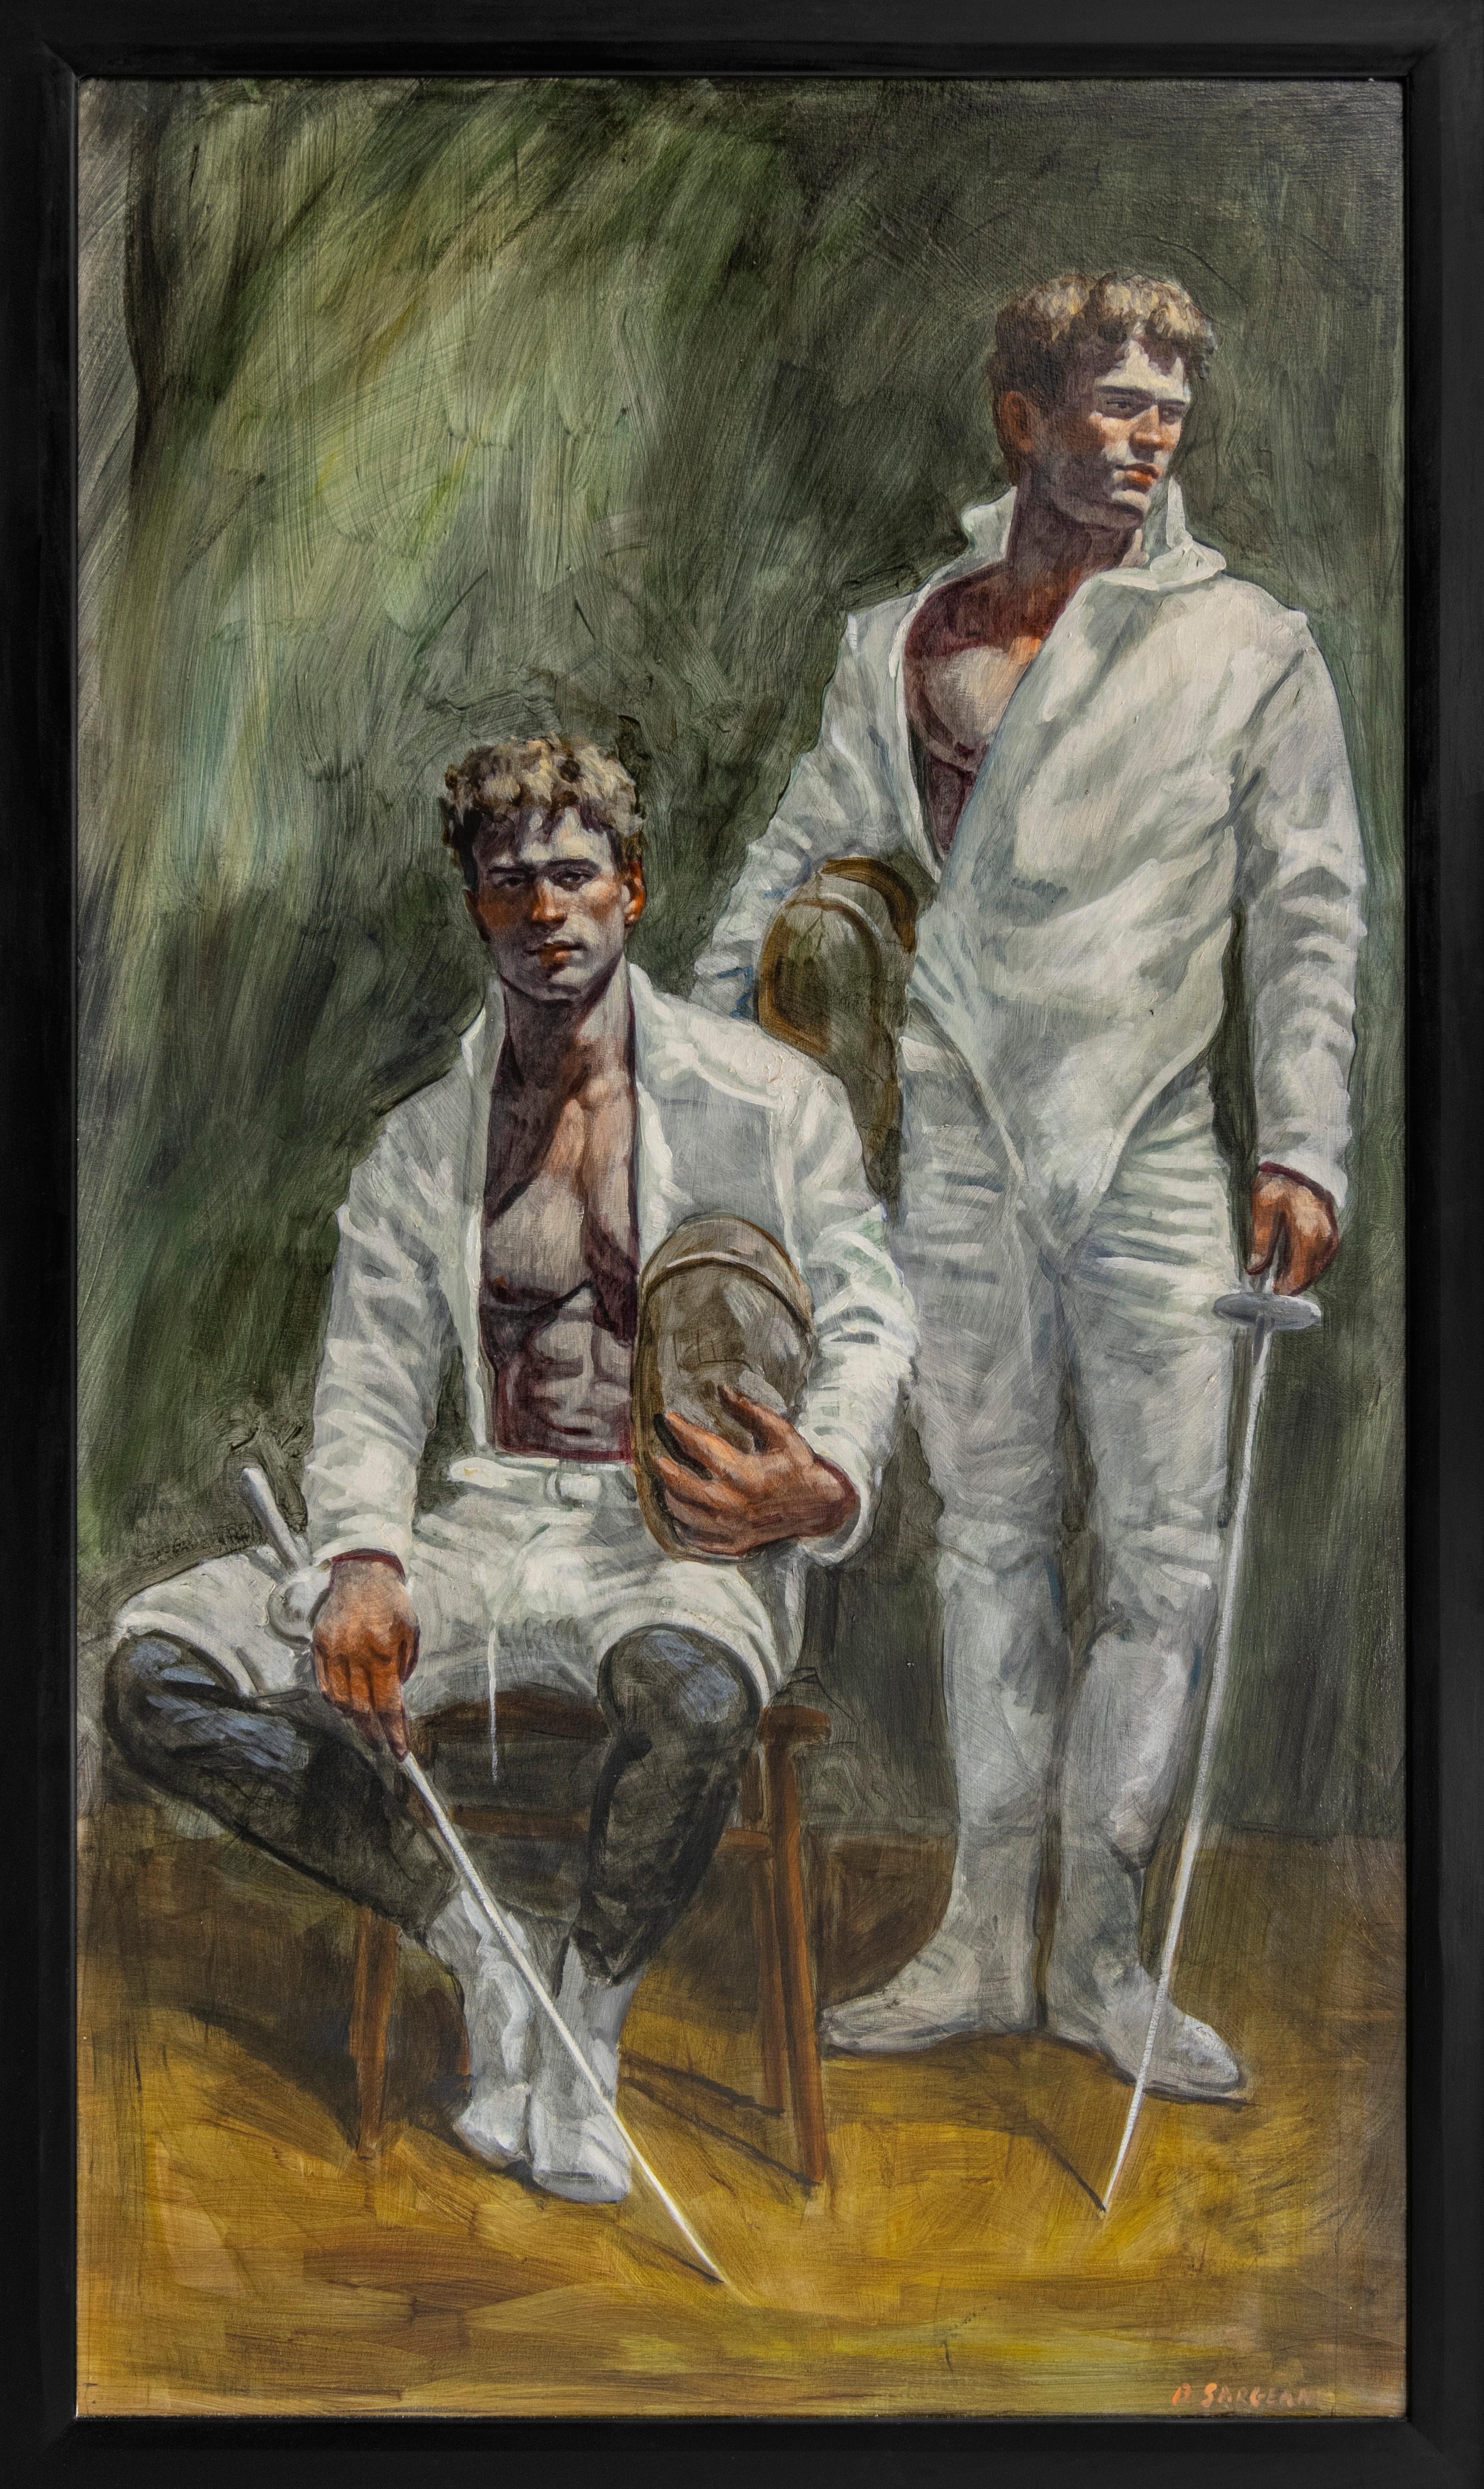 [Bruce Sargeant (1898-1938)] Portrait of Two Fencers